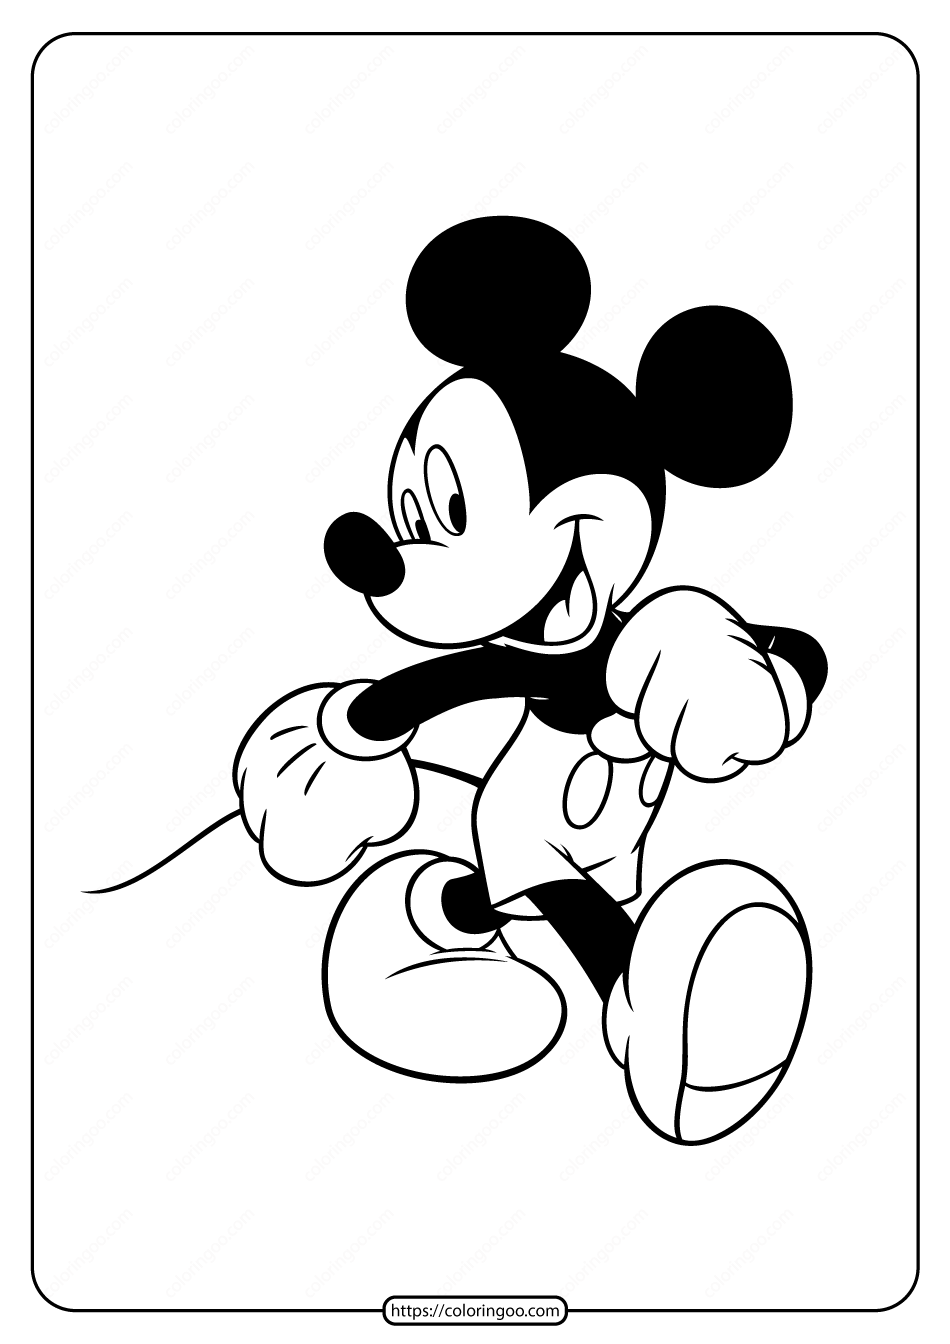 printable mickey mouse walking coloring page